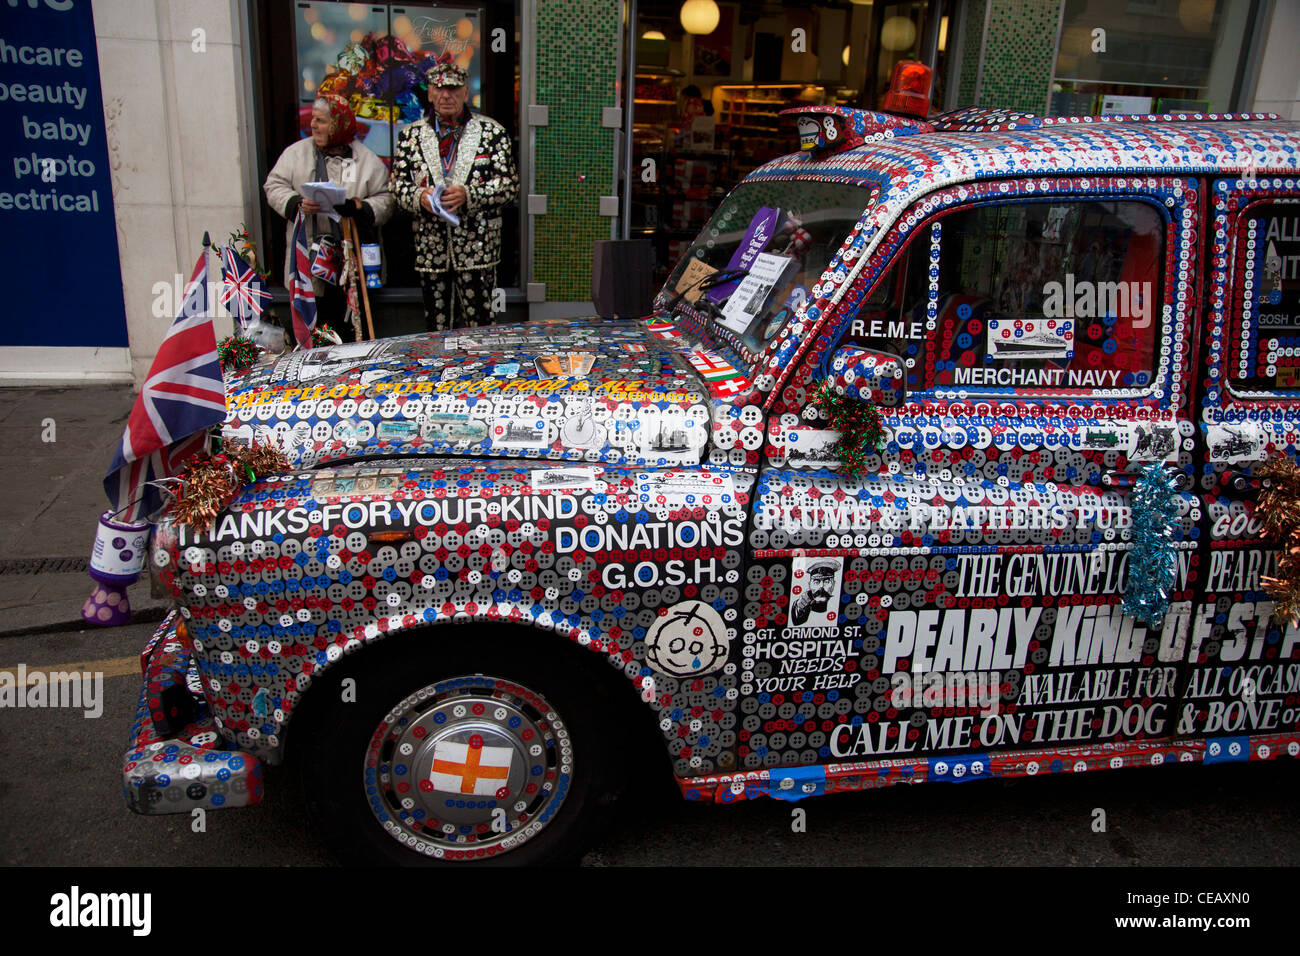 Pearly King of St Pancras with his Pearly taxi cab. Pearly Kings and Queens in London. Seen here in Greenwich, and known as pearlies, they are an organised charitable tradition of working class culture in London, England. Stock Photo